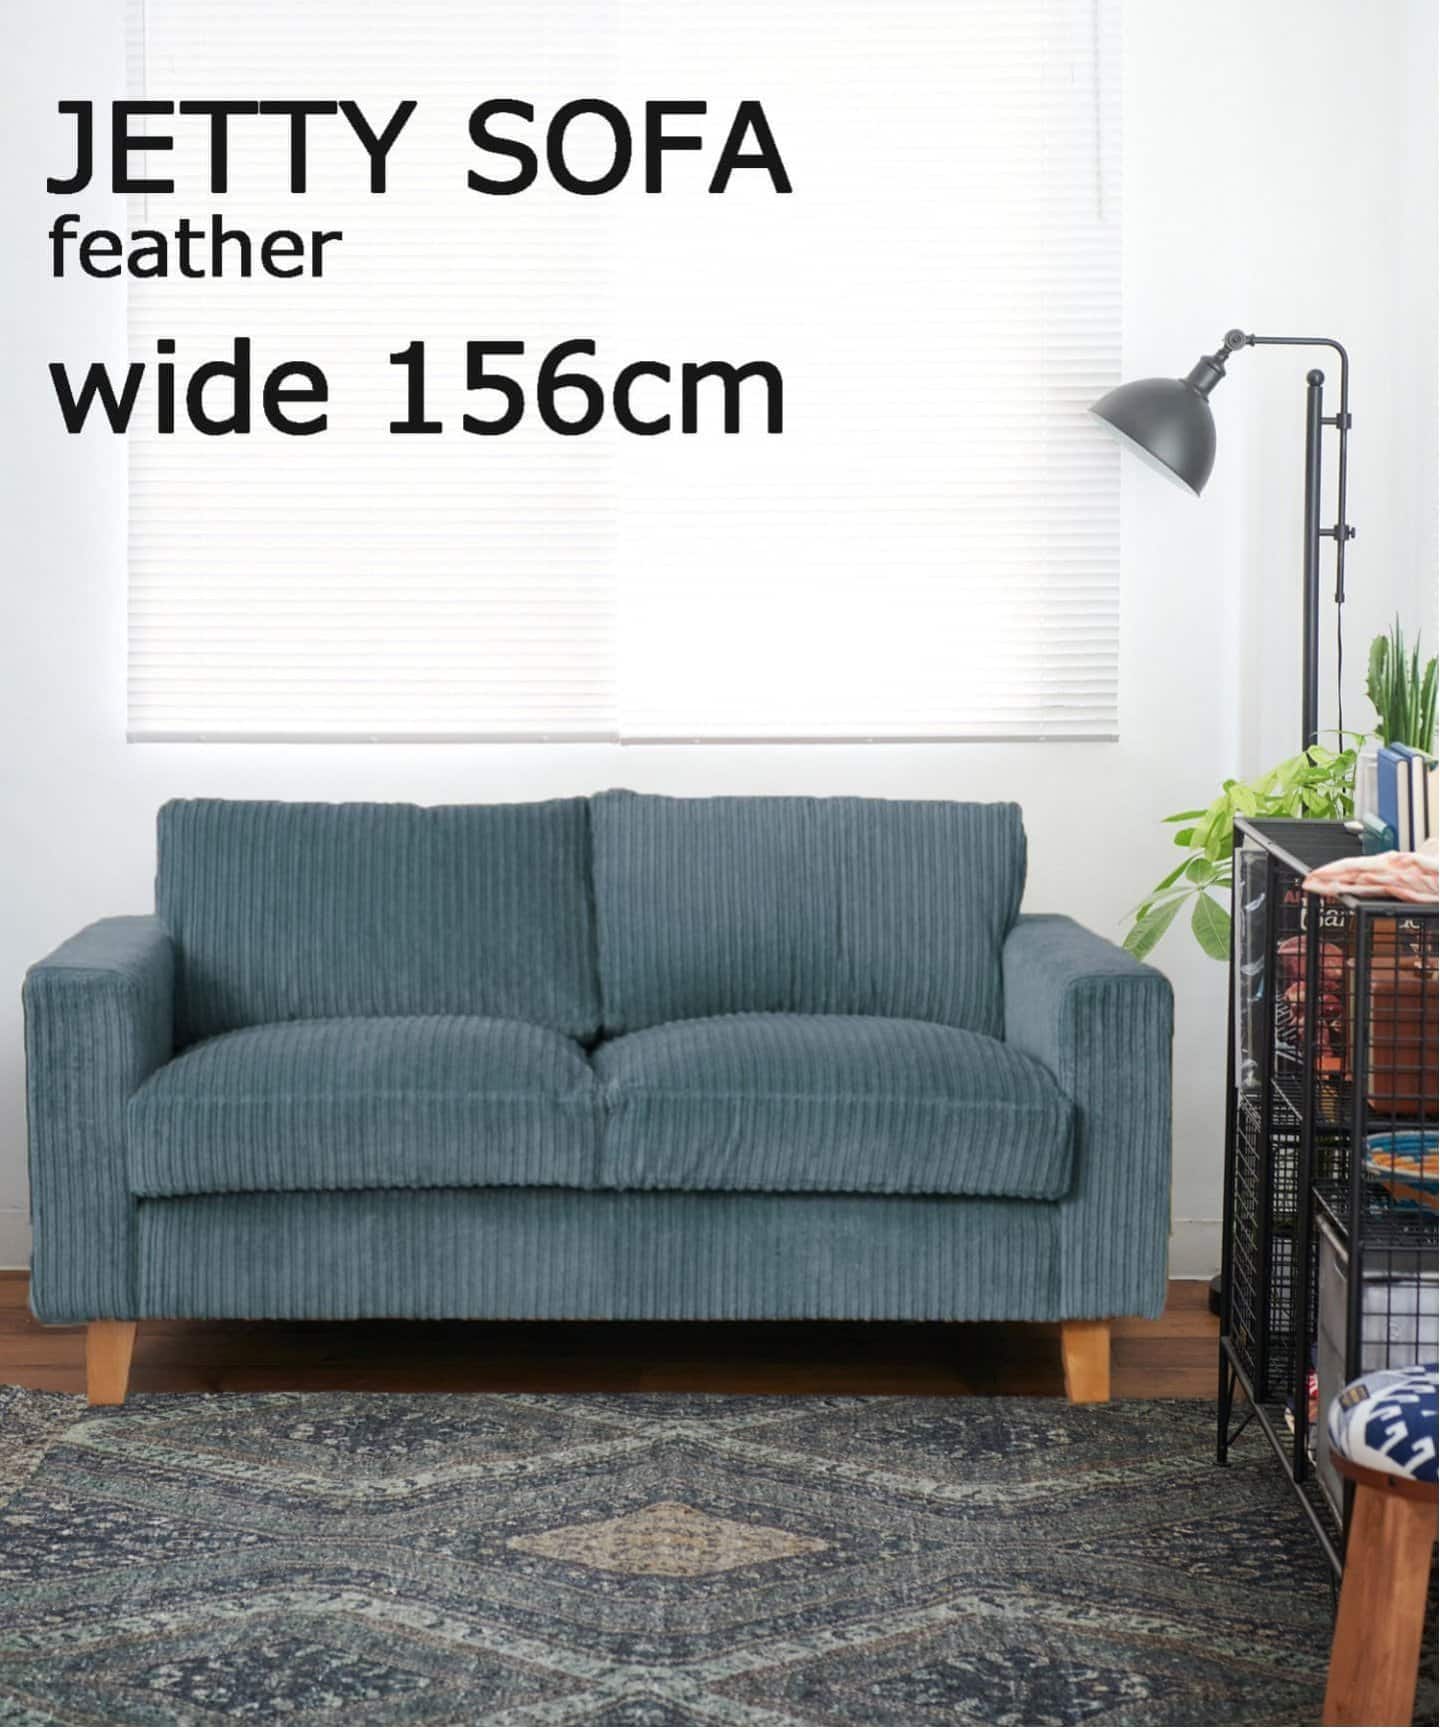 《ORDER》JETTY feather SOFA 2P W156 AC-07 BL ジェティー フェザーソファ ブルー 家具